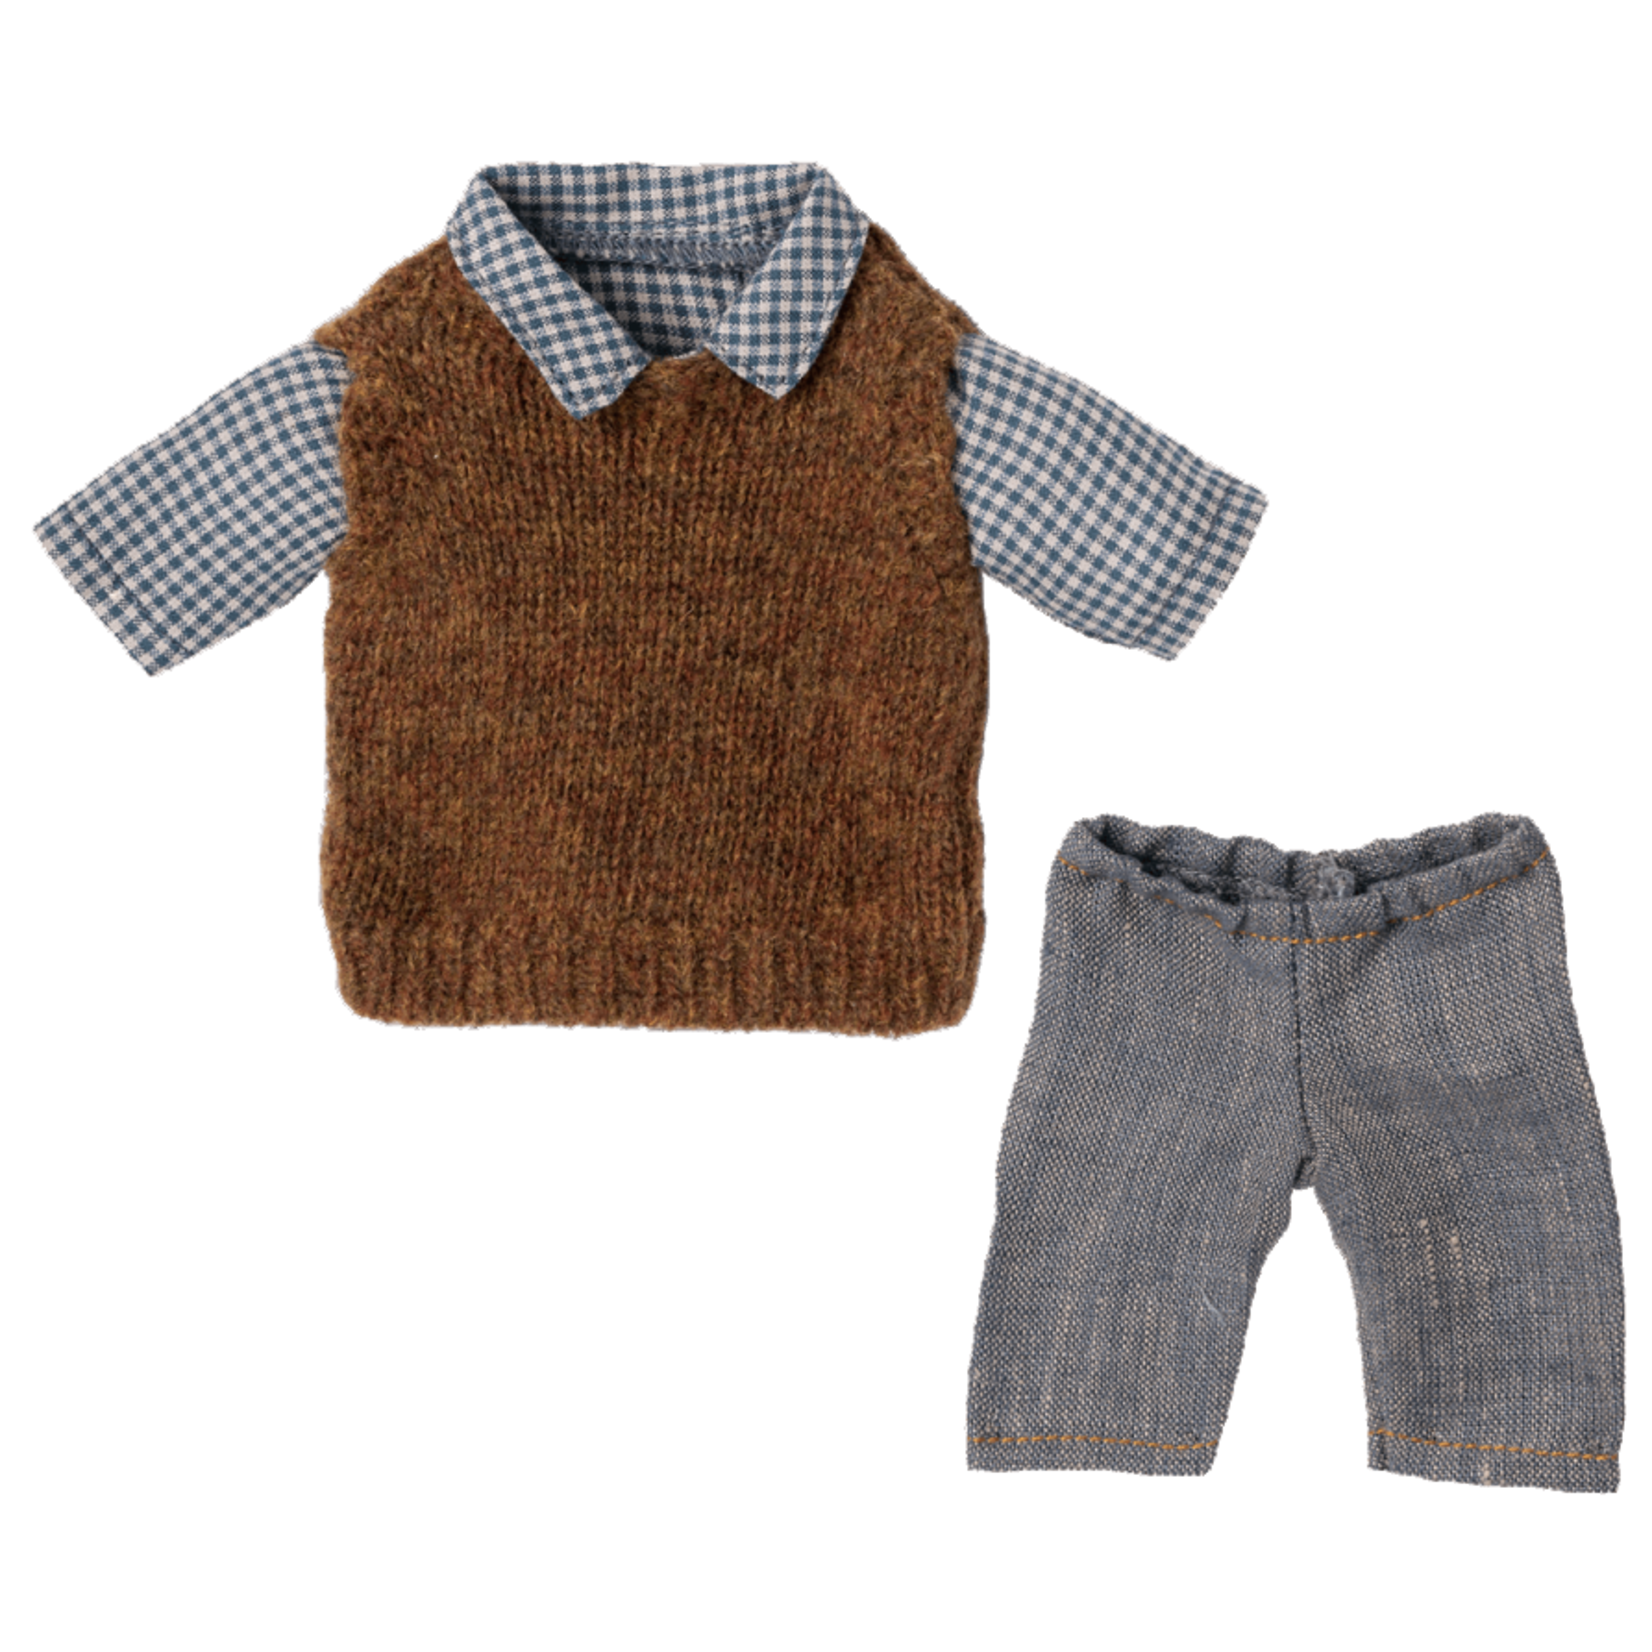 Maileg Maileg Shirt slipover and pants CLOTHES for Teddy dad